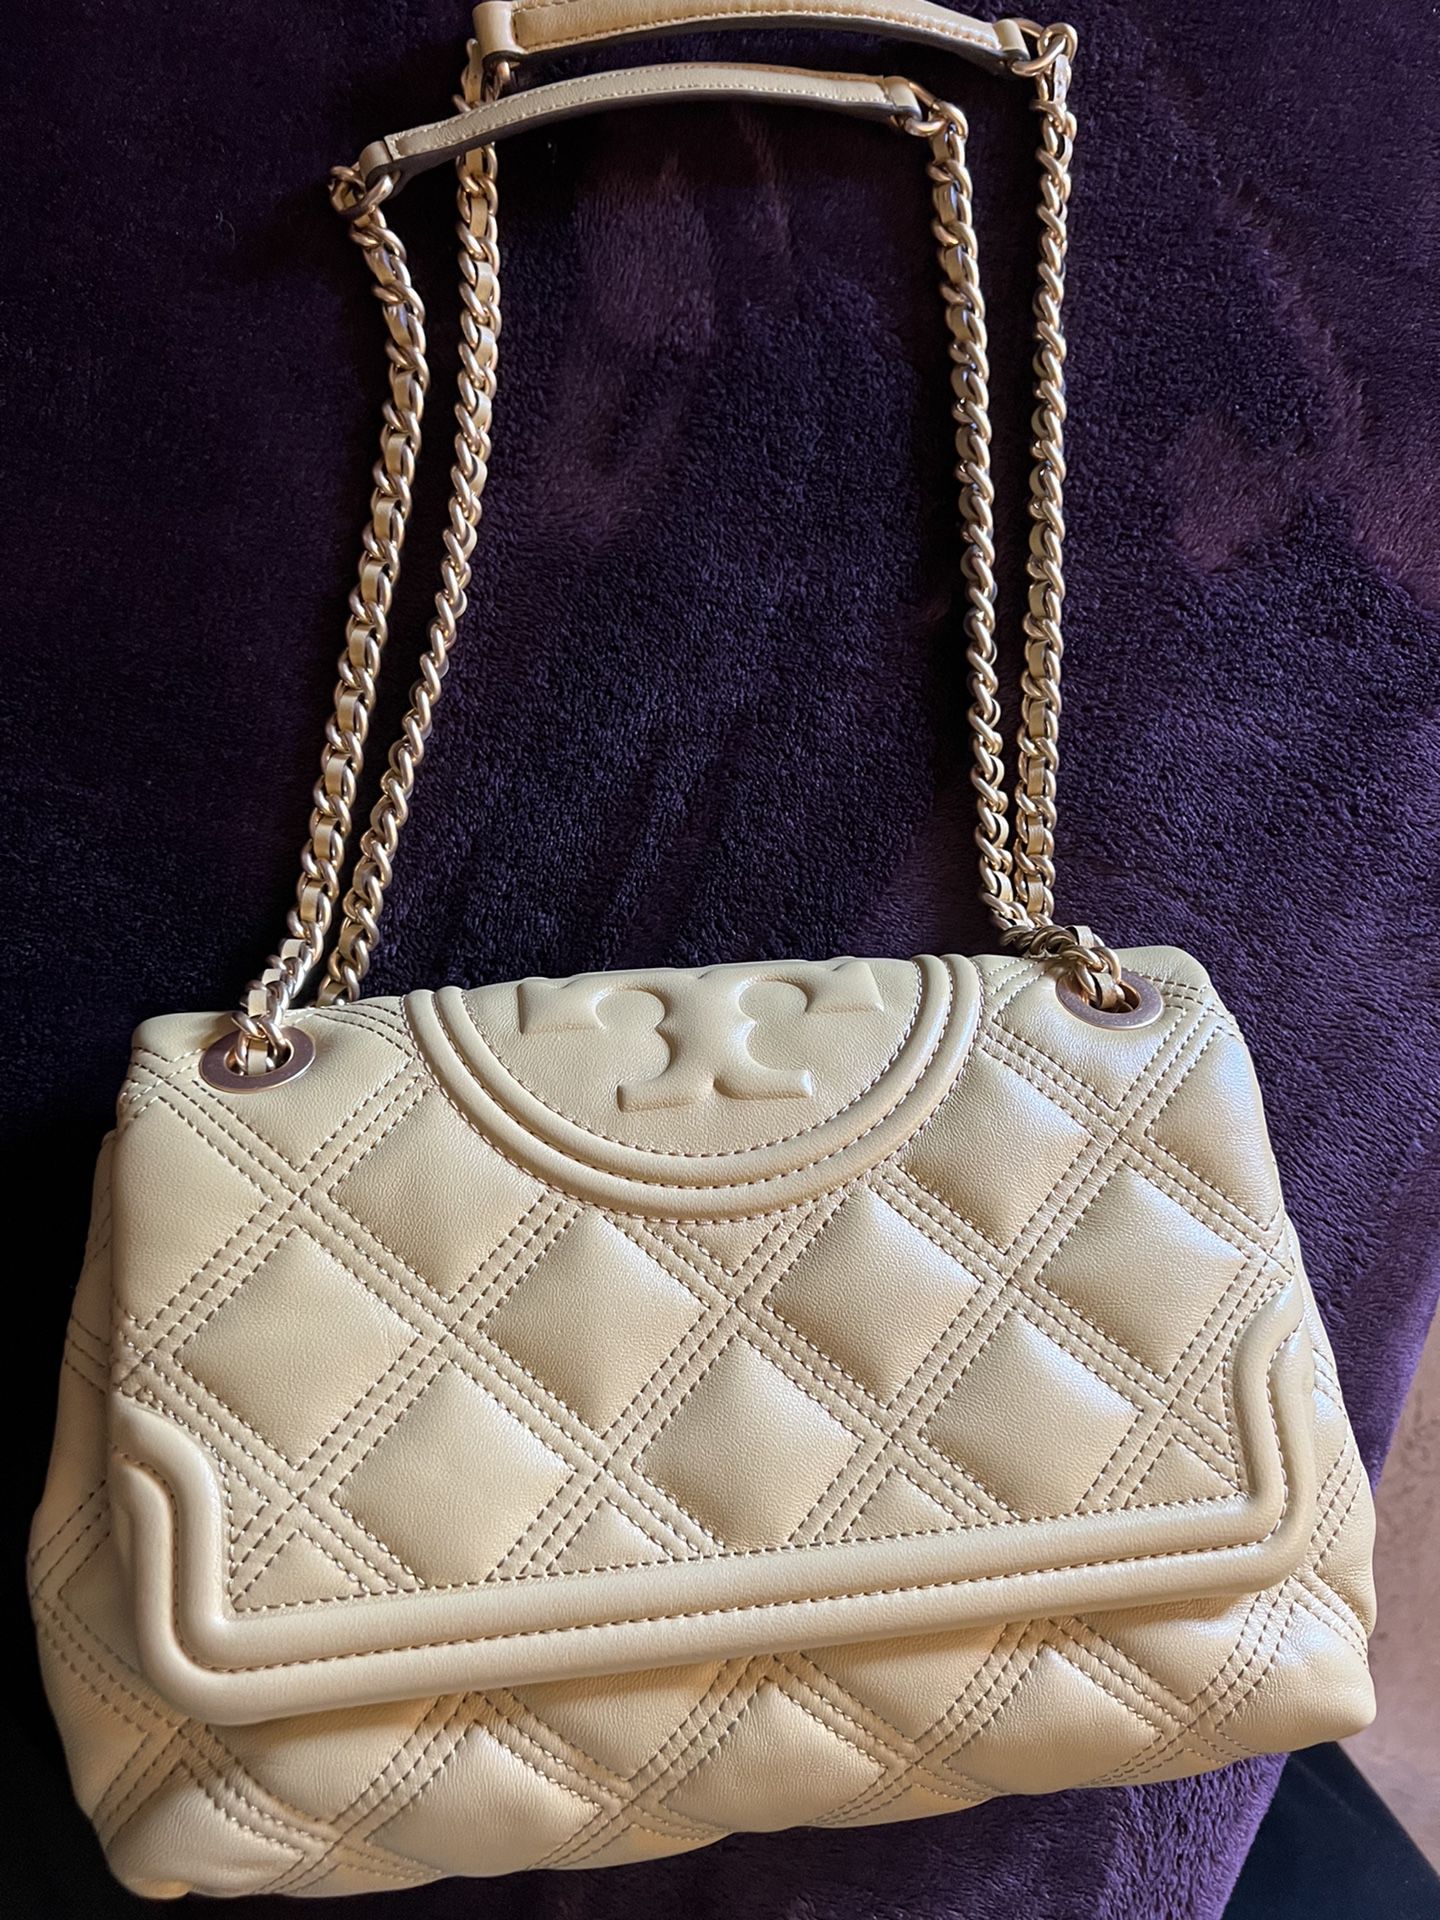 Tory Burch Purse for Sale in San Diego, CA - OfferUp